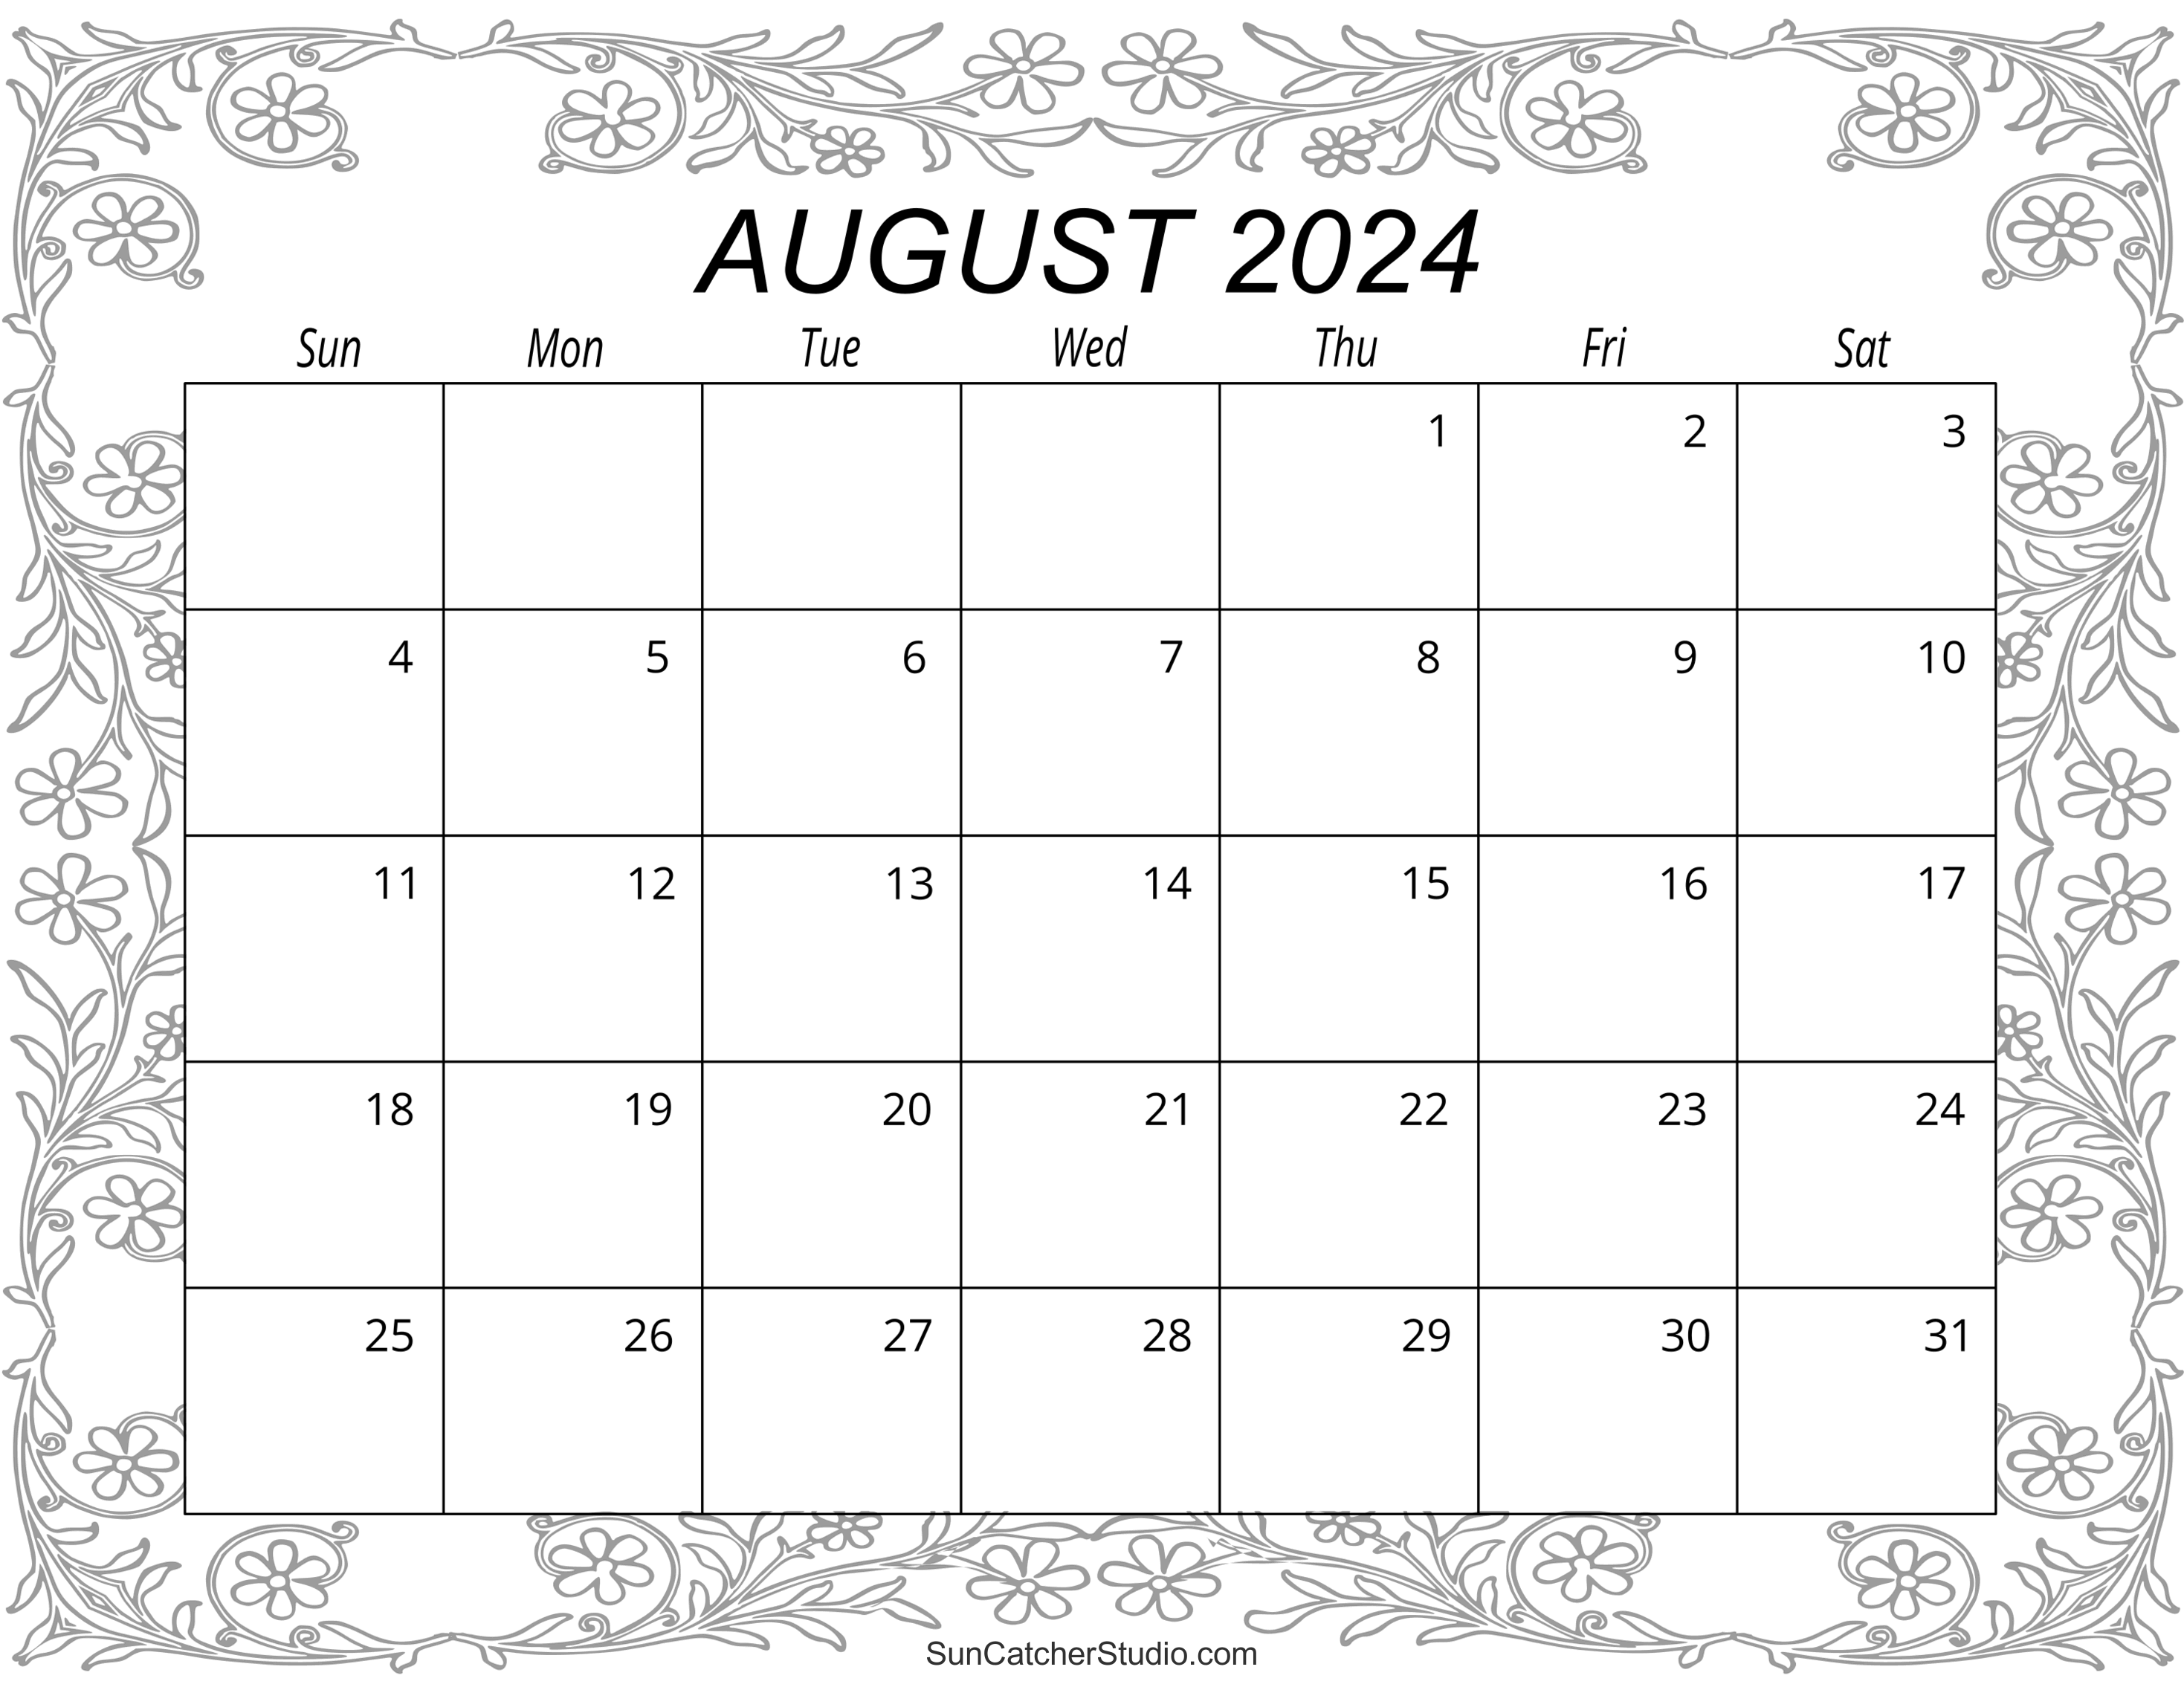 August 2024 Calendar (Free Printable) – Diy Projects, Patterns throughout Free Printable August 2024 Calendar Cute